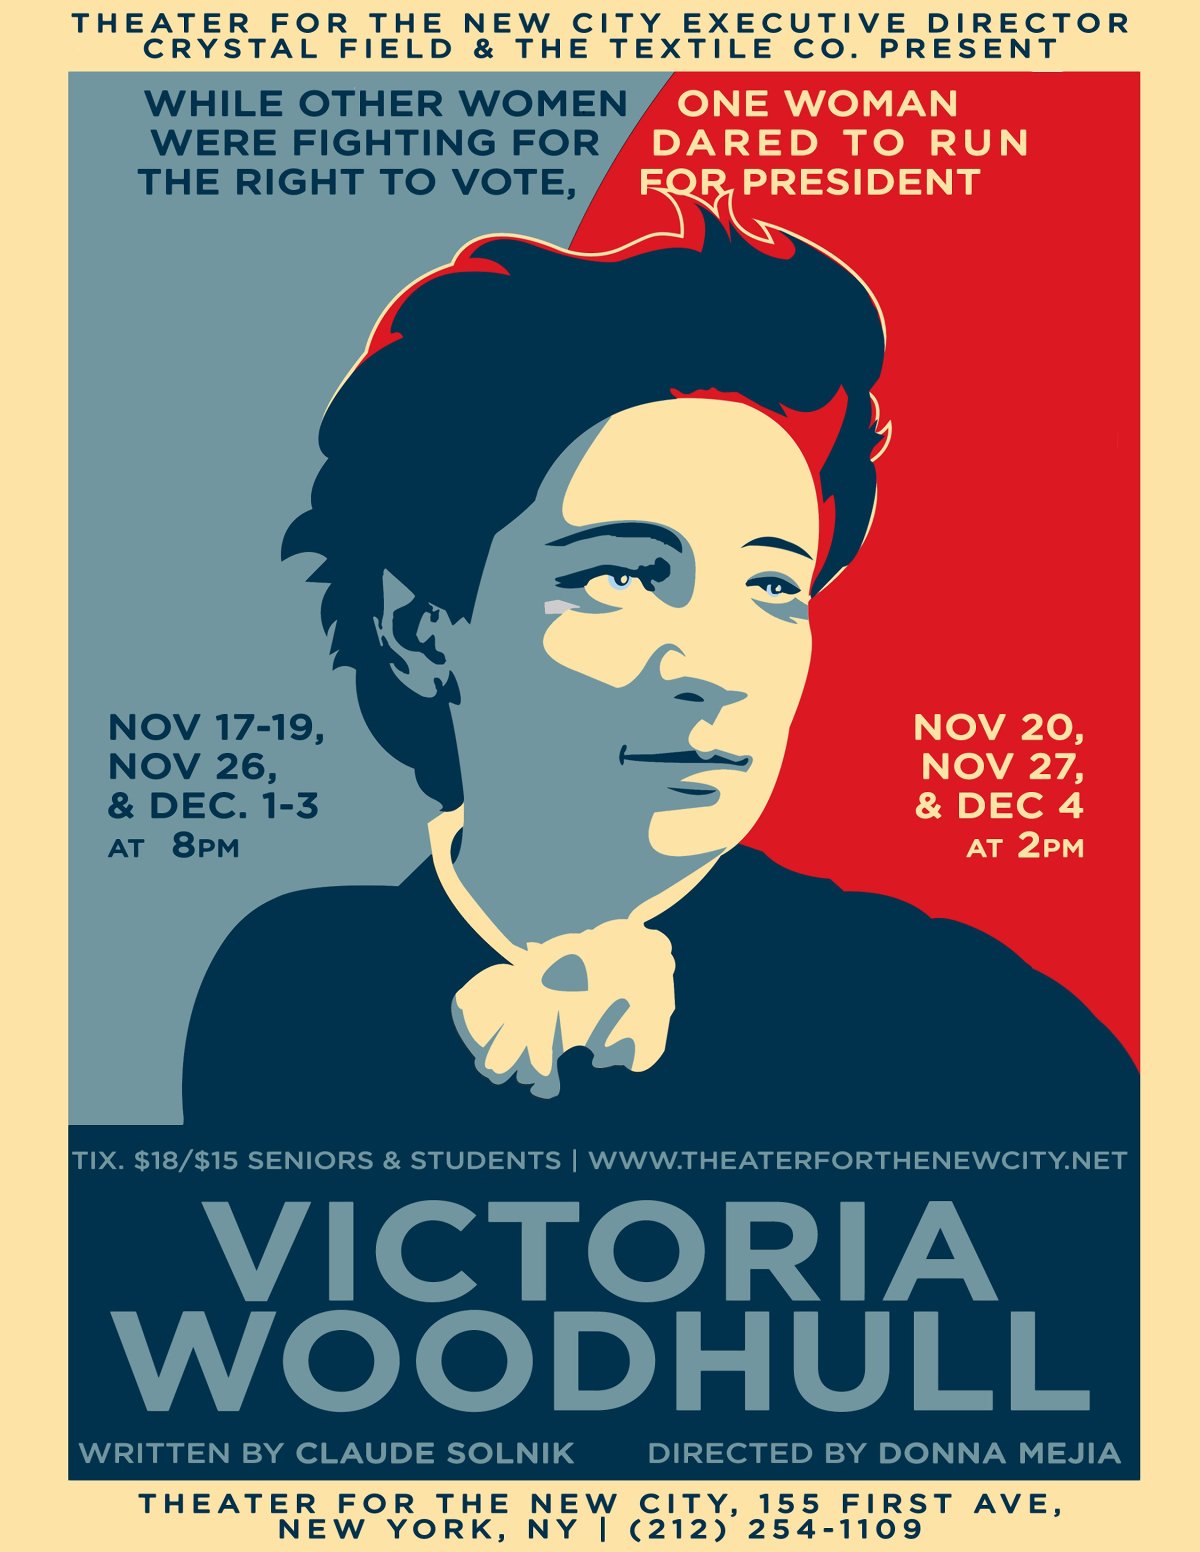 Long before Hillary, there was Victoria Woodhull | amNewYork